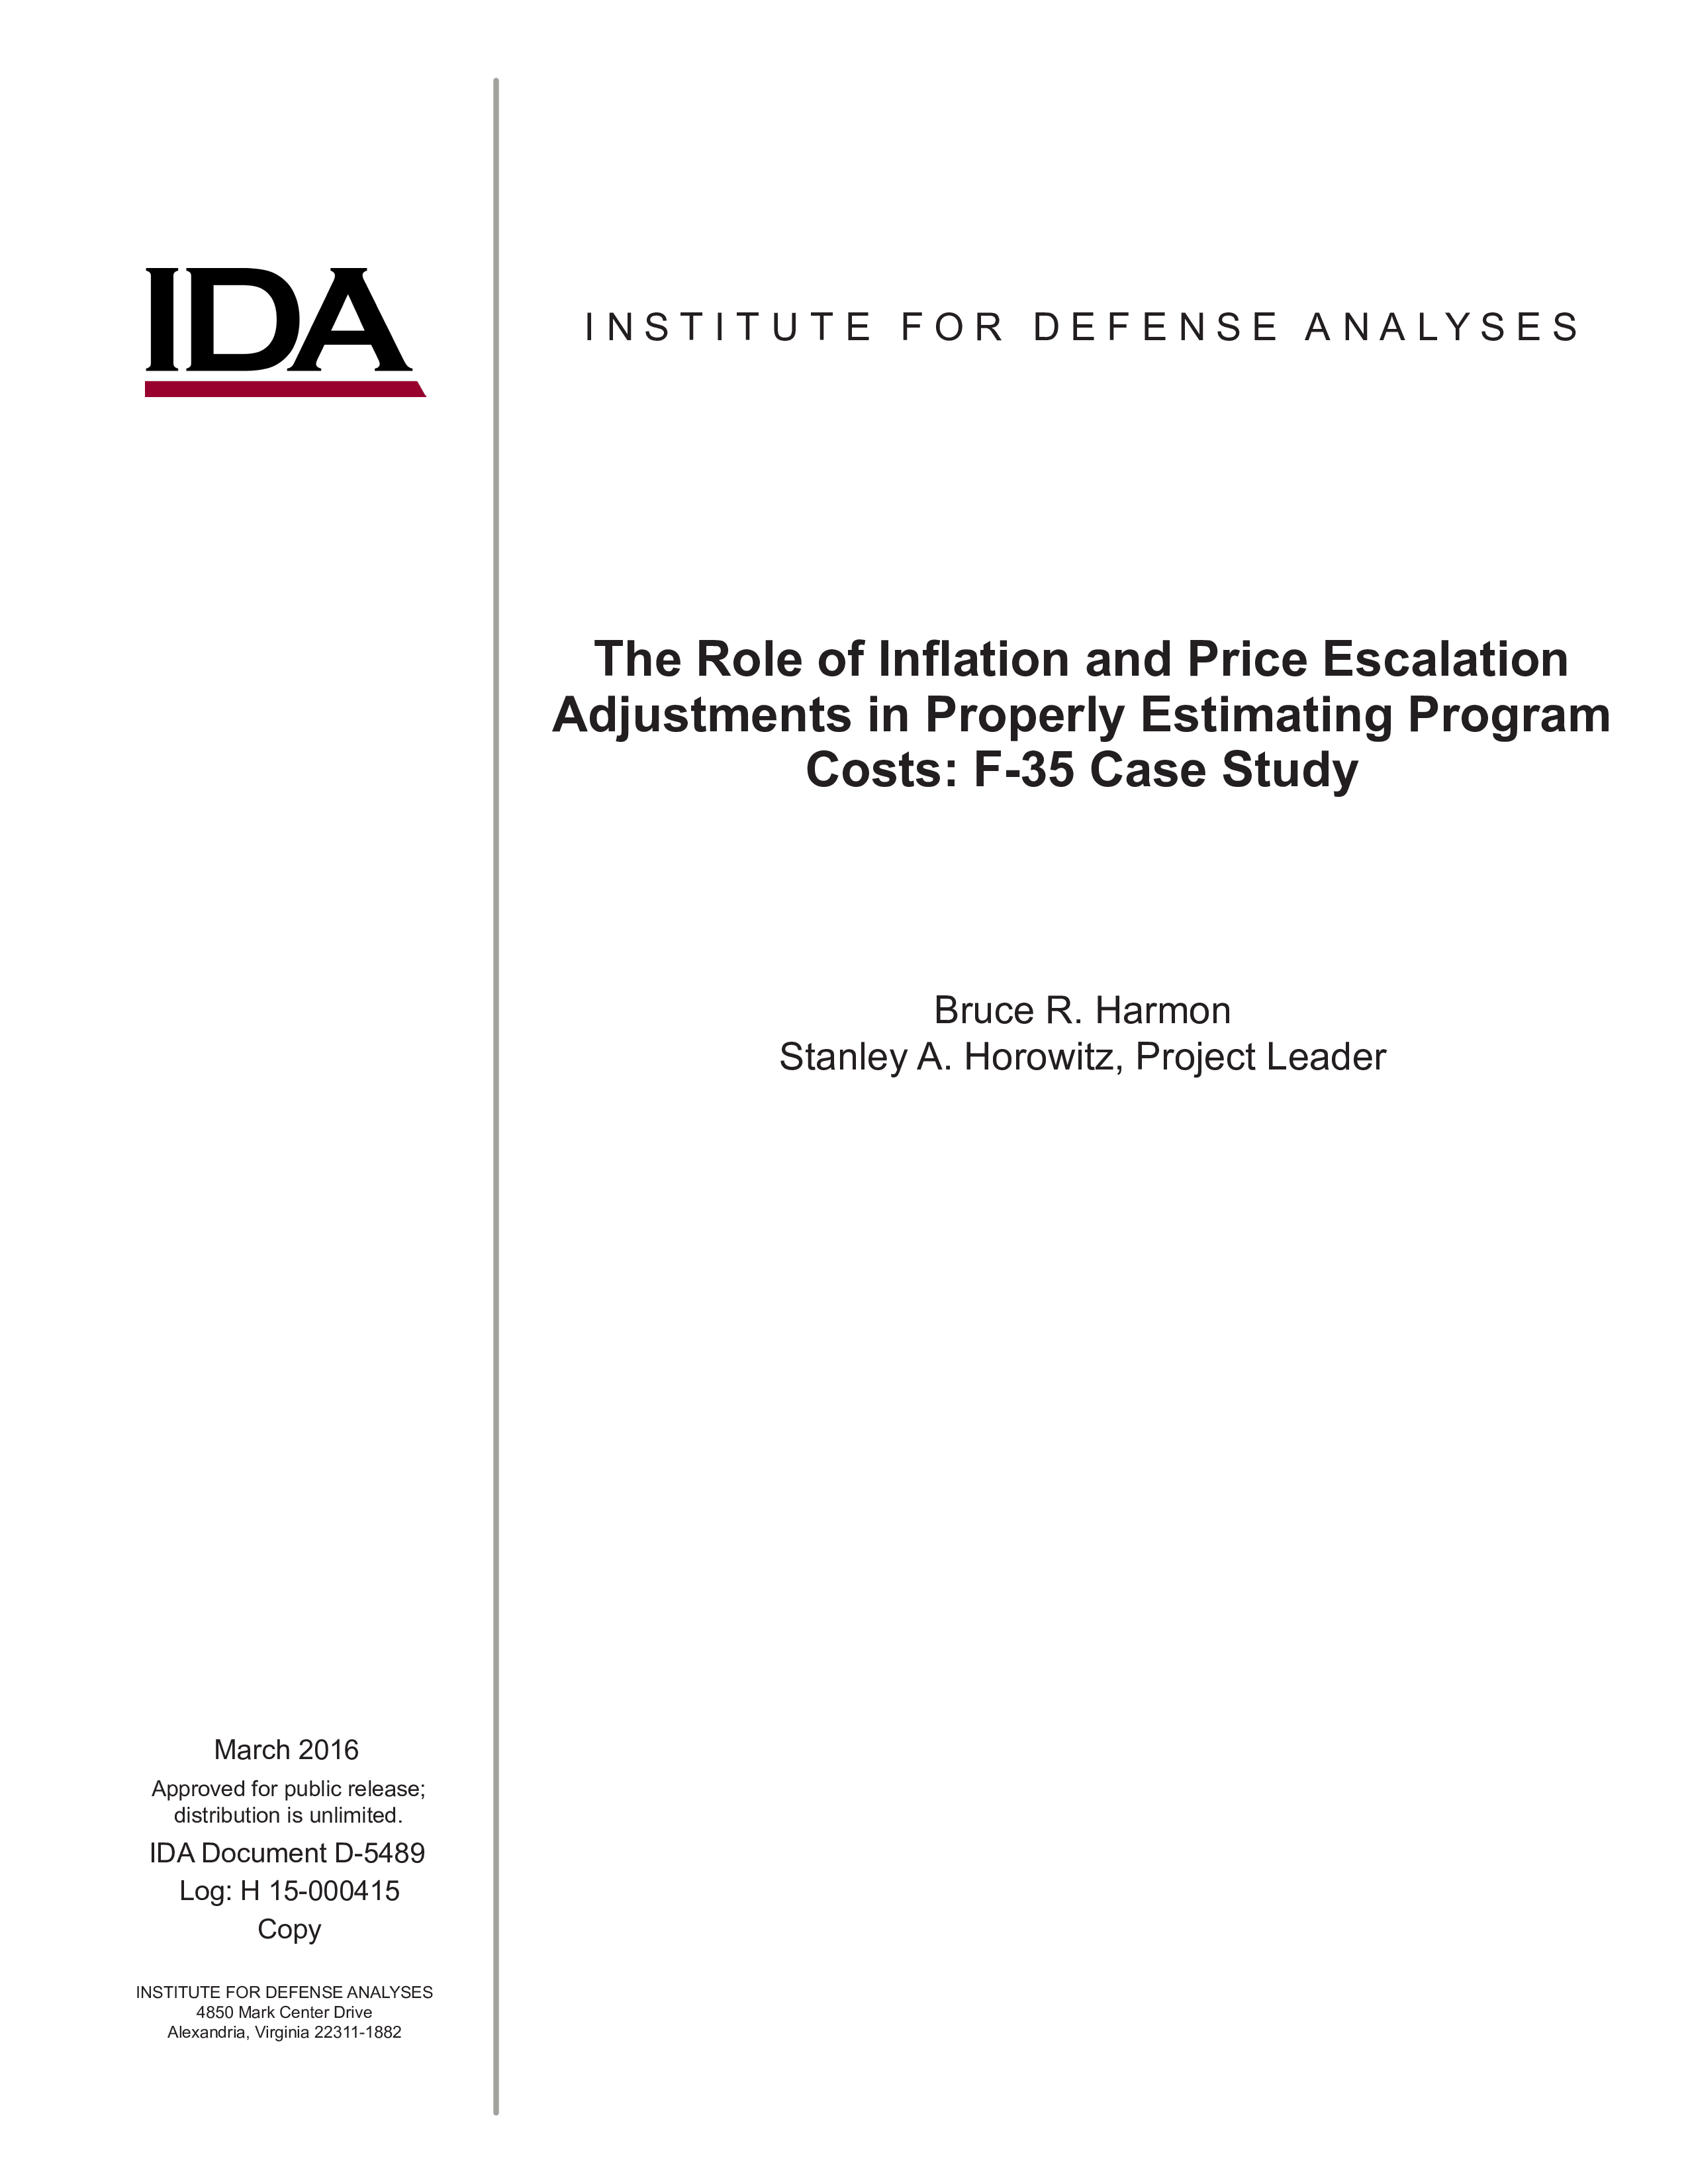 The Role of Inflation and Price Escalation Adjustments in Properly Estimating Program Costs: F-35 Case Study